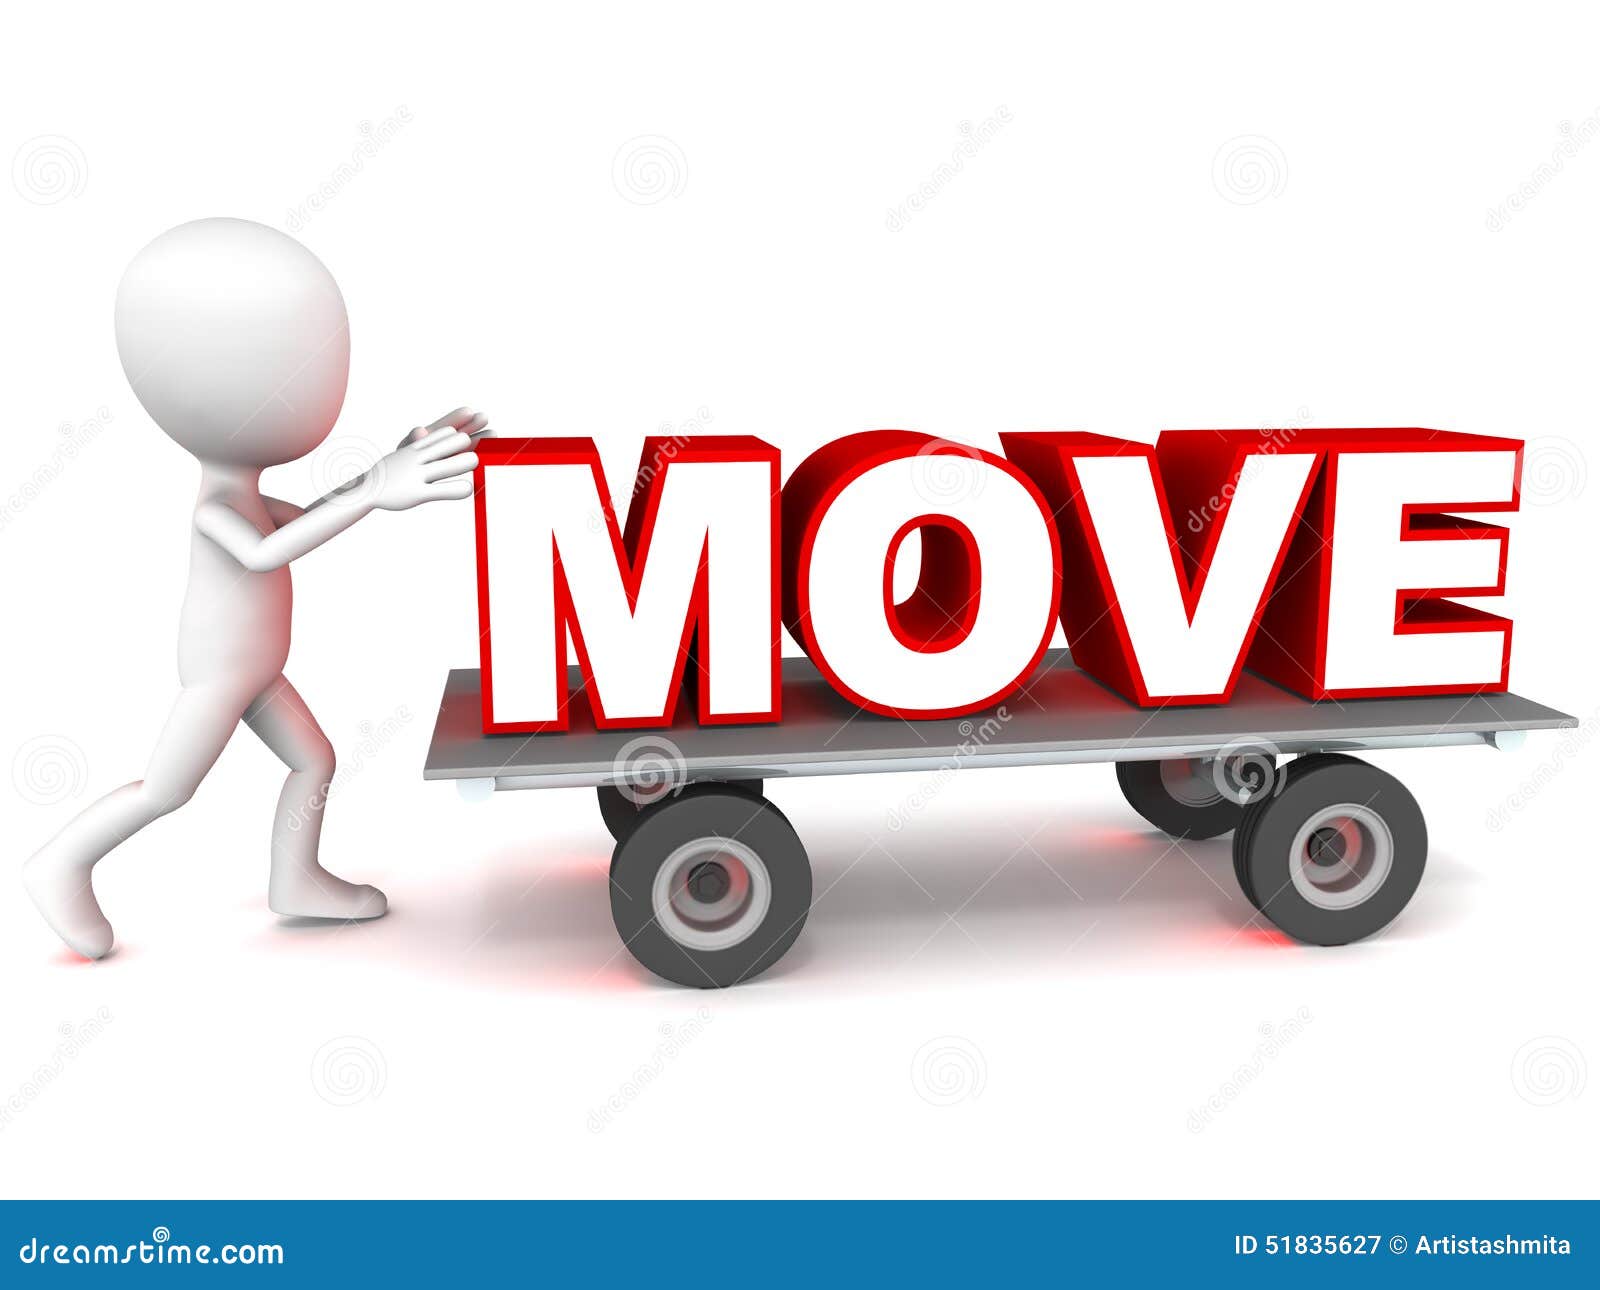 clipart images that move - photo #39